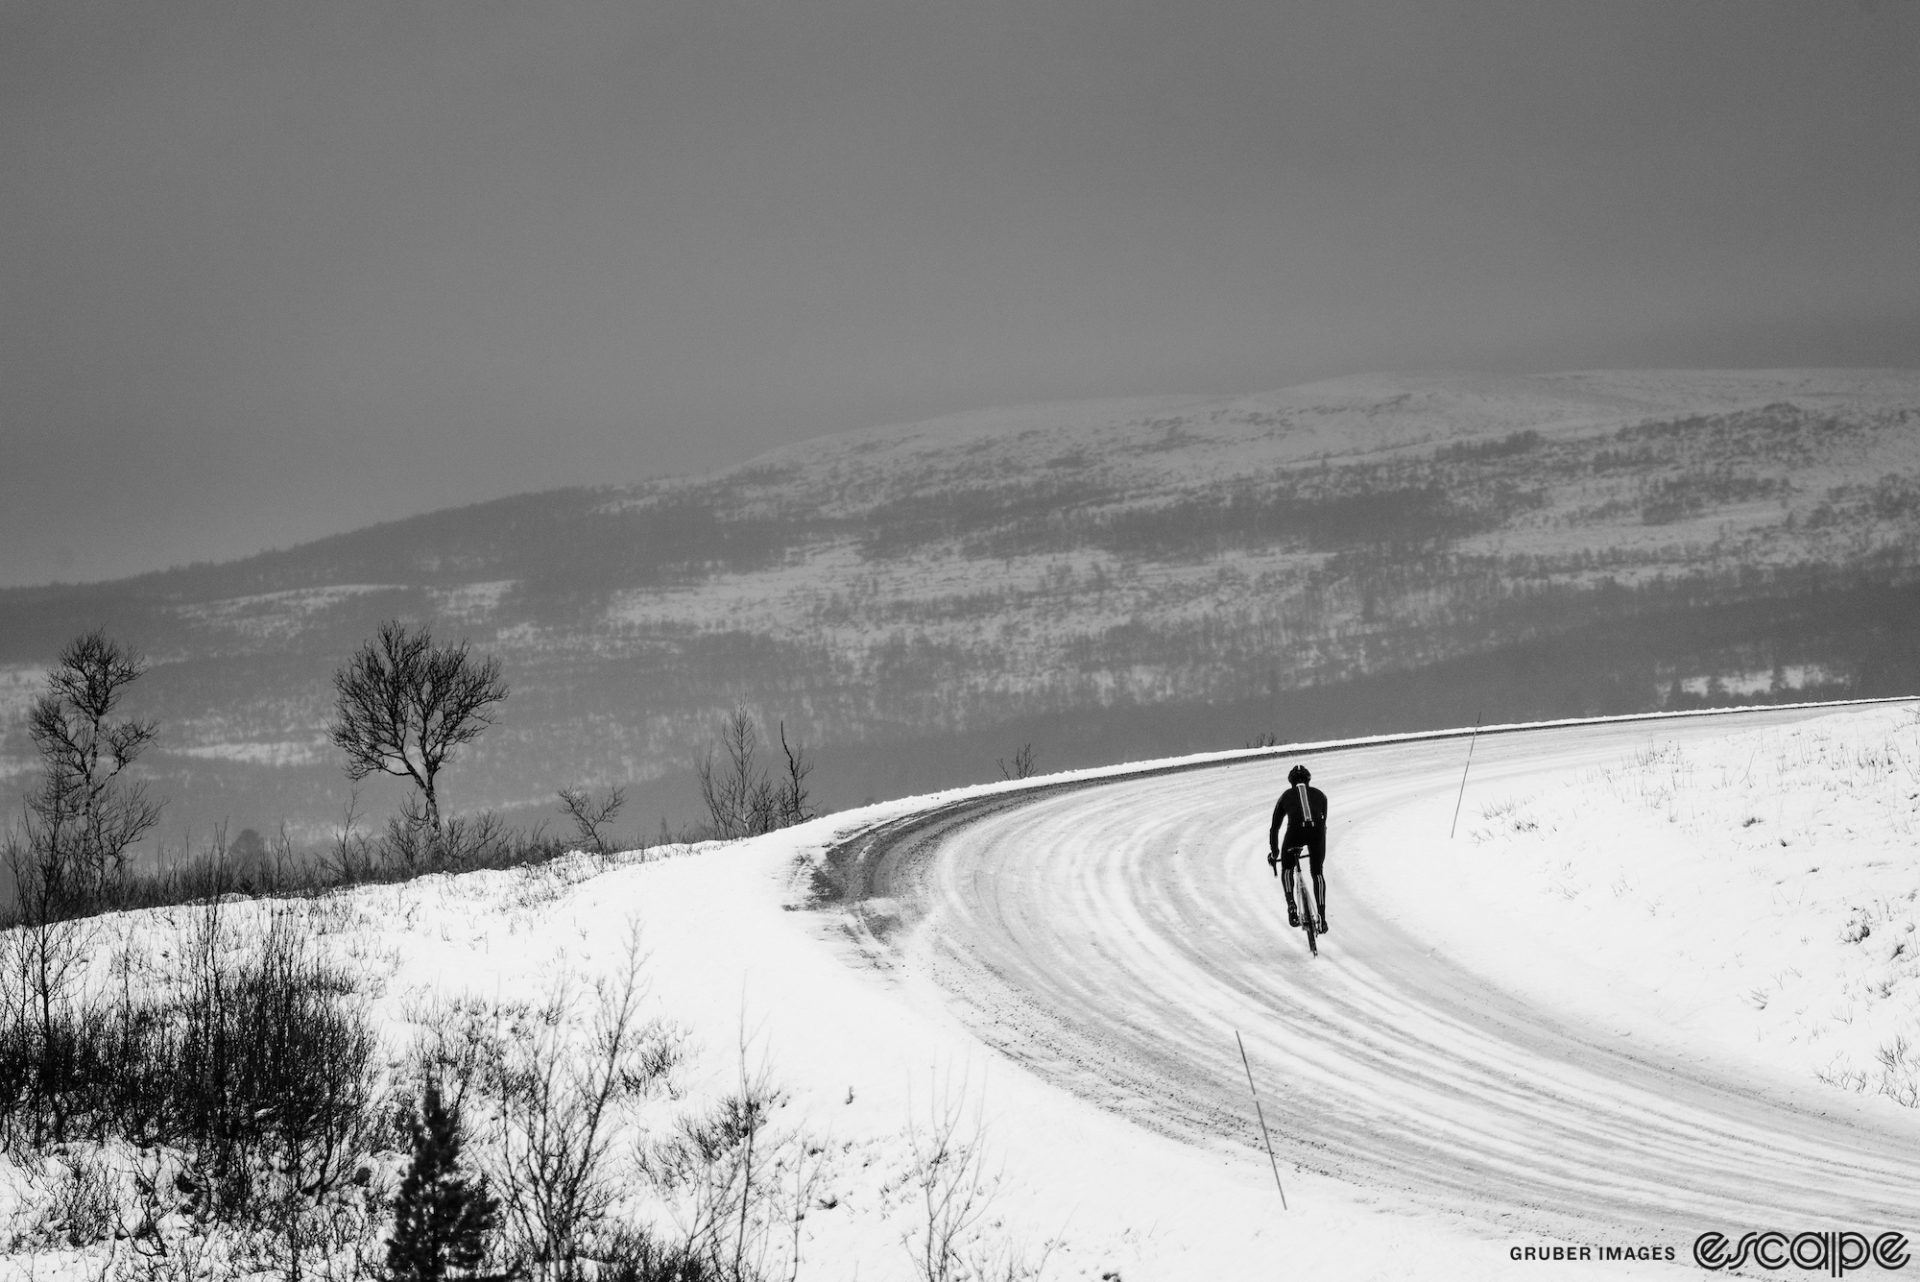 A solo rider climbs a snow-covered road around a curve. A broad, gentle hill rises in the background, the forested ridge covered in snow. The light is flat and dark.